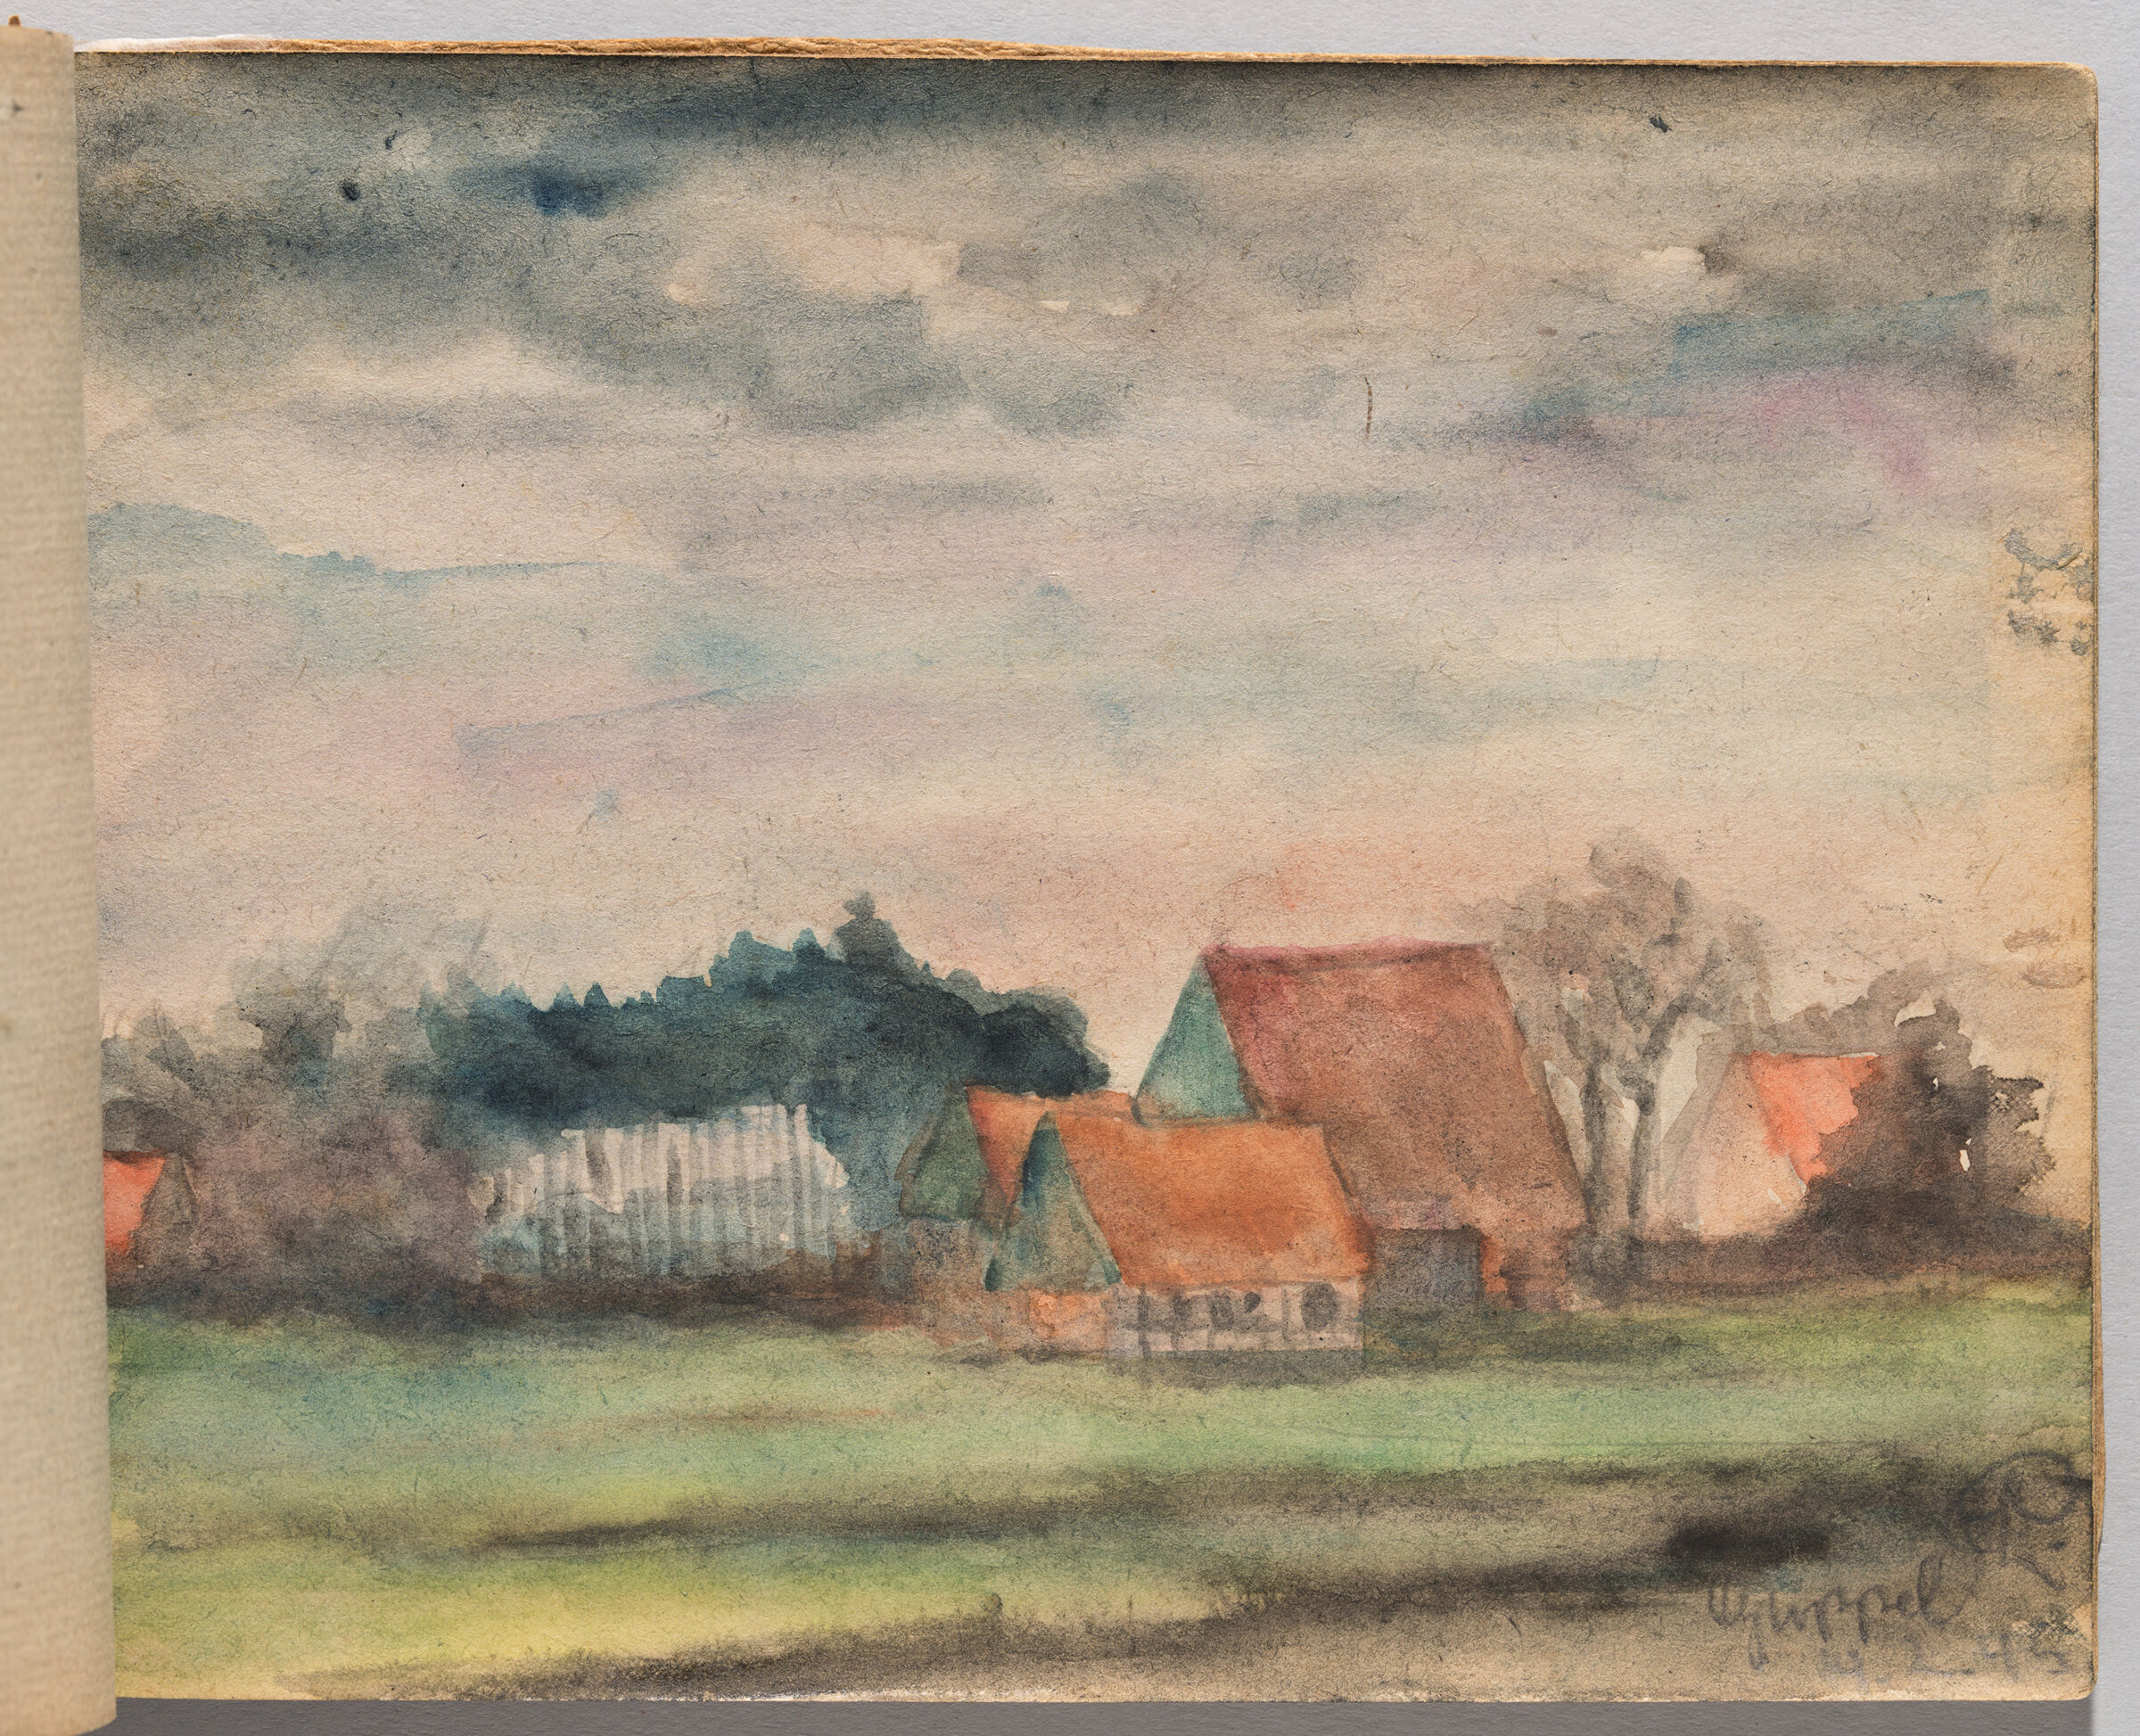 Untitled (Blank, Left Page); Untitled (Village Scene, Right Page)